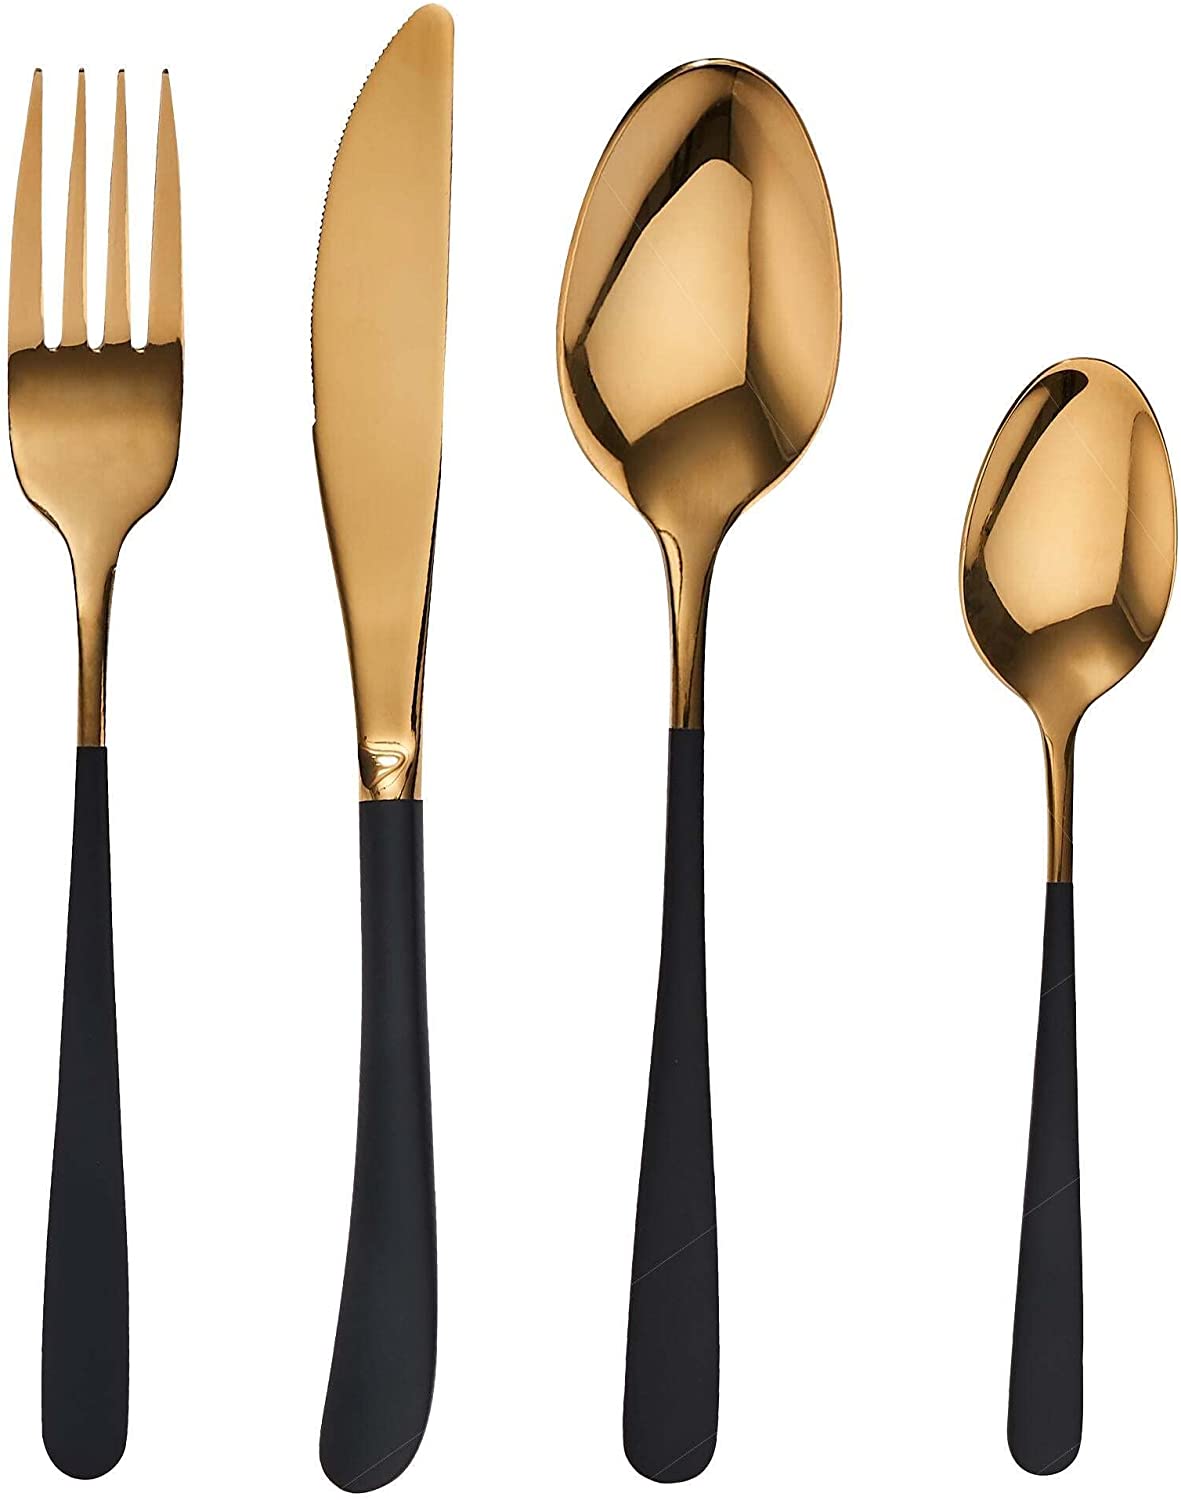 BUTLERS Empire Cutlery Set of 4 - High-Quality Cutlery Set in Gold / Black - Stainless Steel Cutlery Set